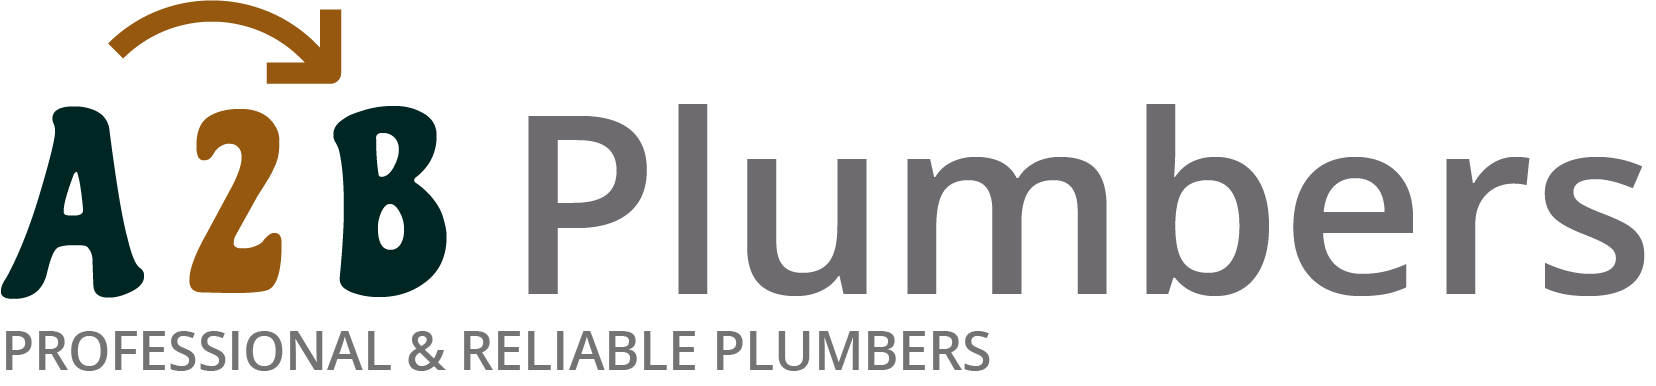 If you need a boiler installed, a radiator repaired or a leaking tap fixed, call us now - we provide services for properties in Bunhill Fields and the local area.